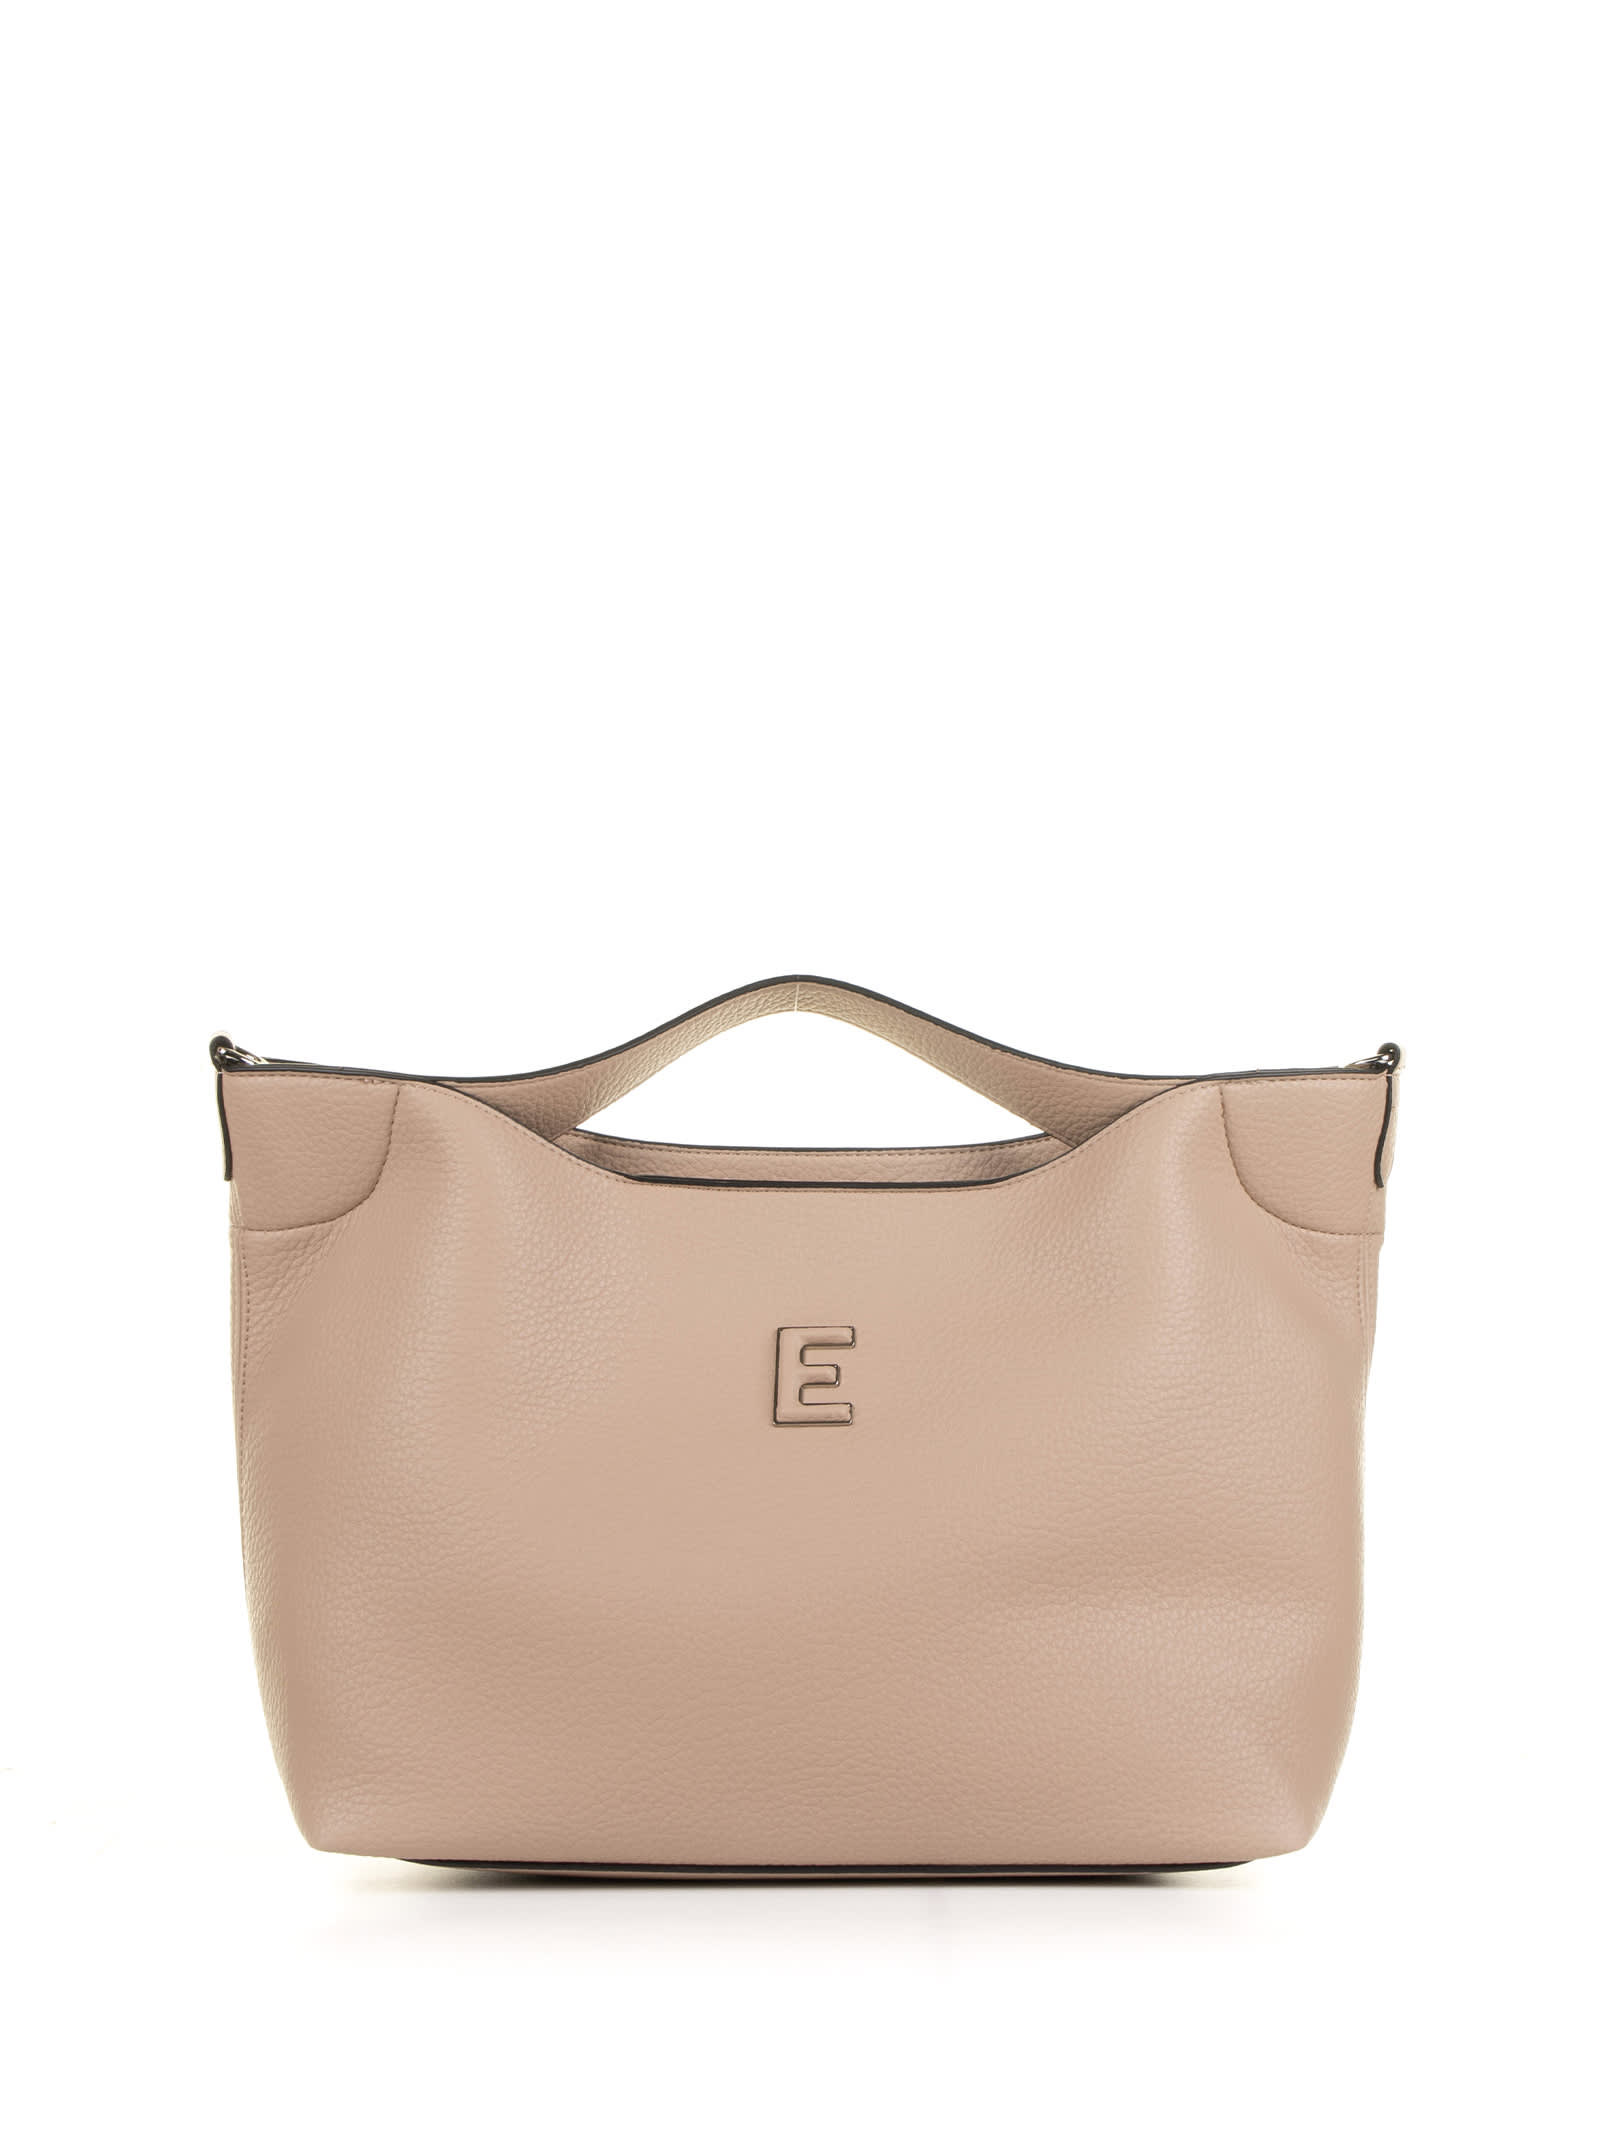 Ermanno Scervino Rachele Small Powder Pink Leather Handbag In Brown